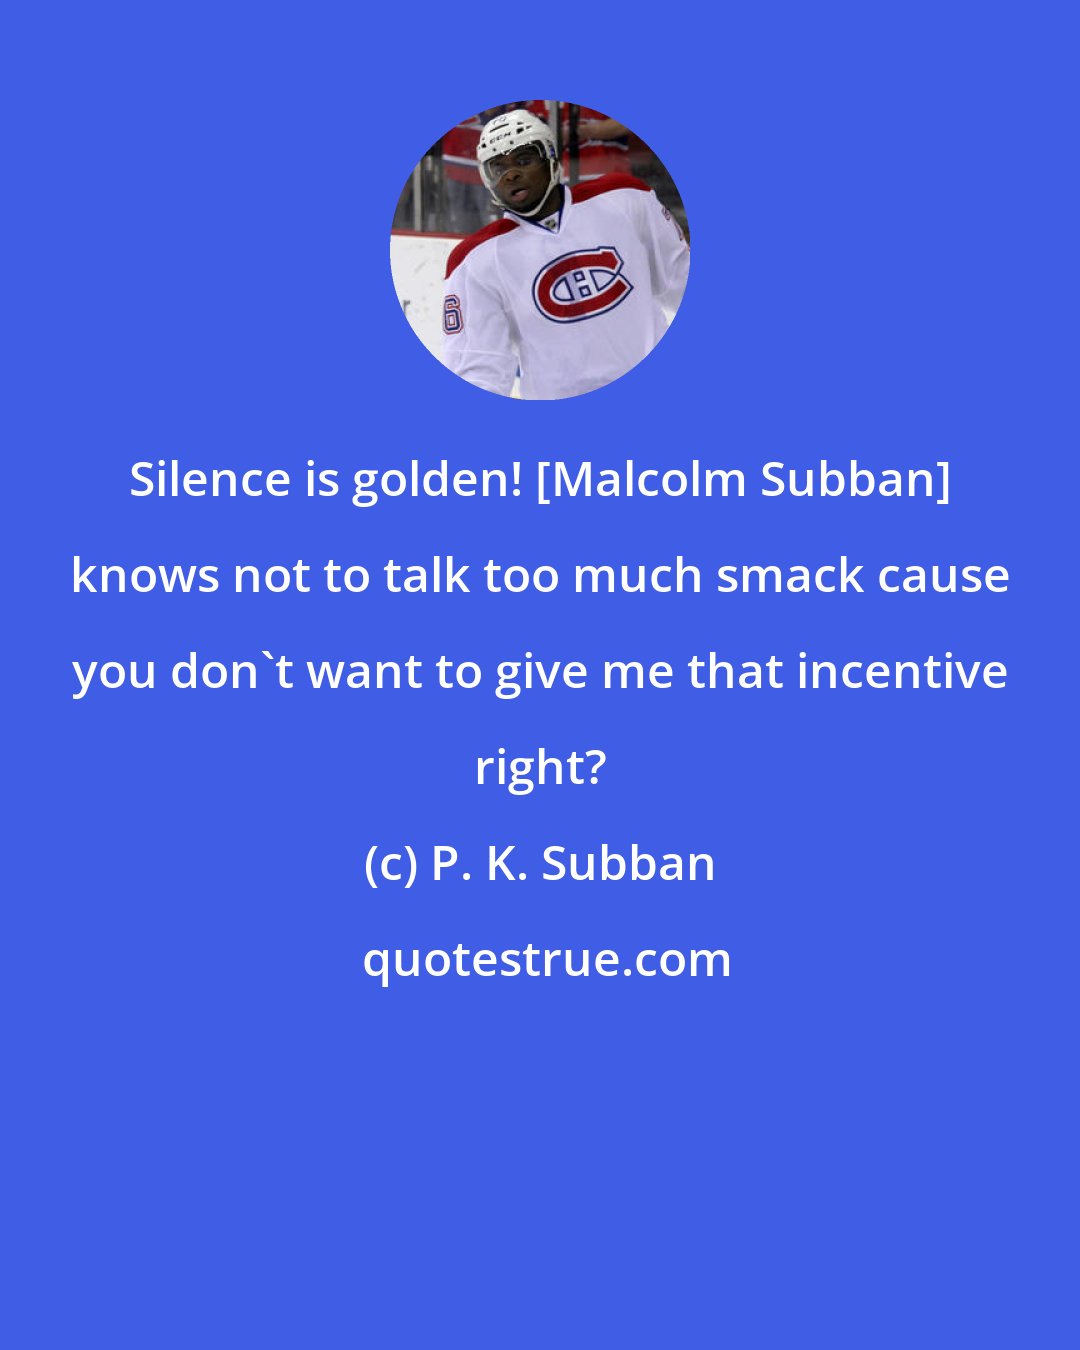 P. K. Subban: Silence is golden! [Malcolm Subban] knows not to talk too much smack cause you don't want to give me that incentive right?